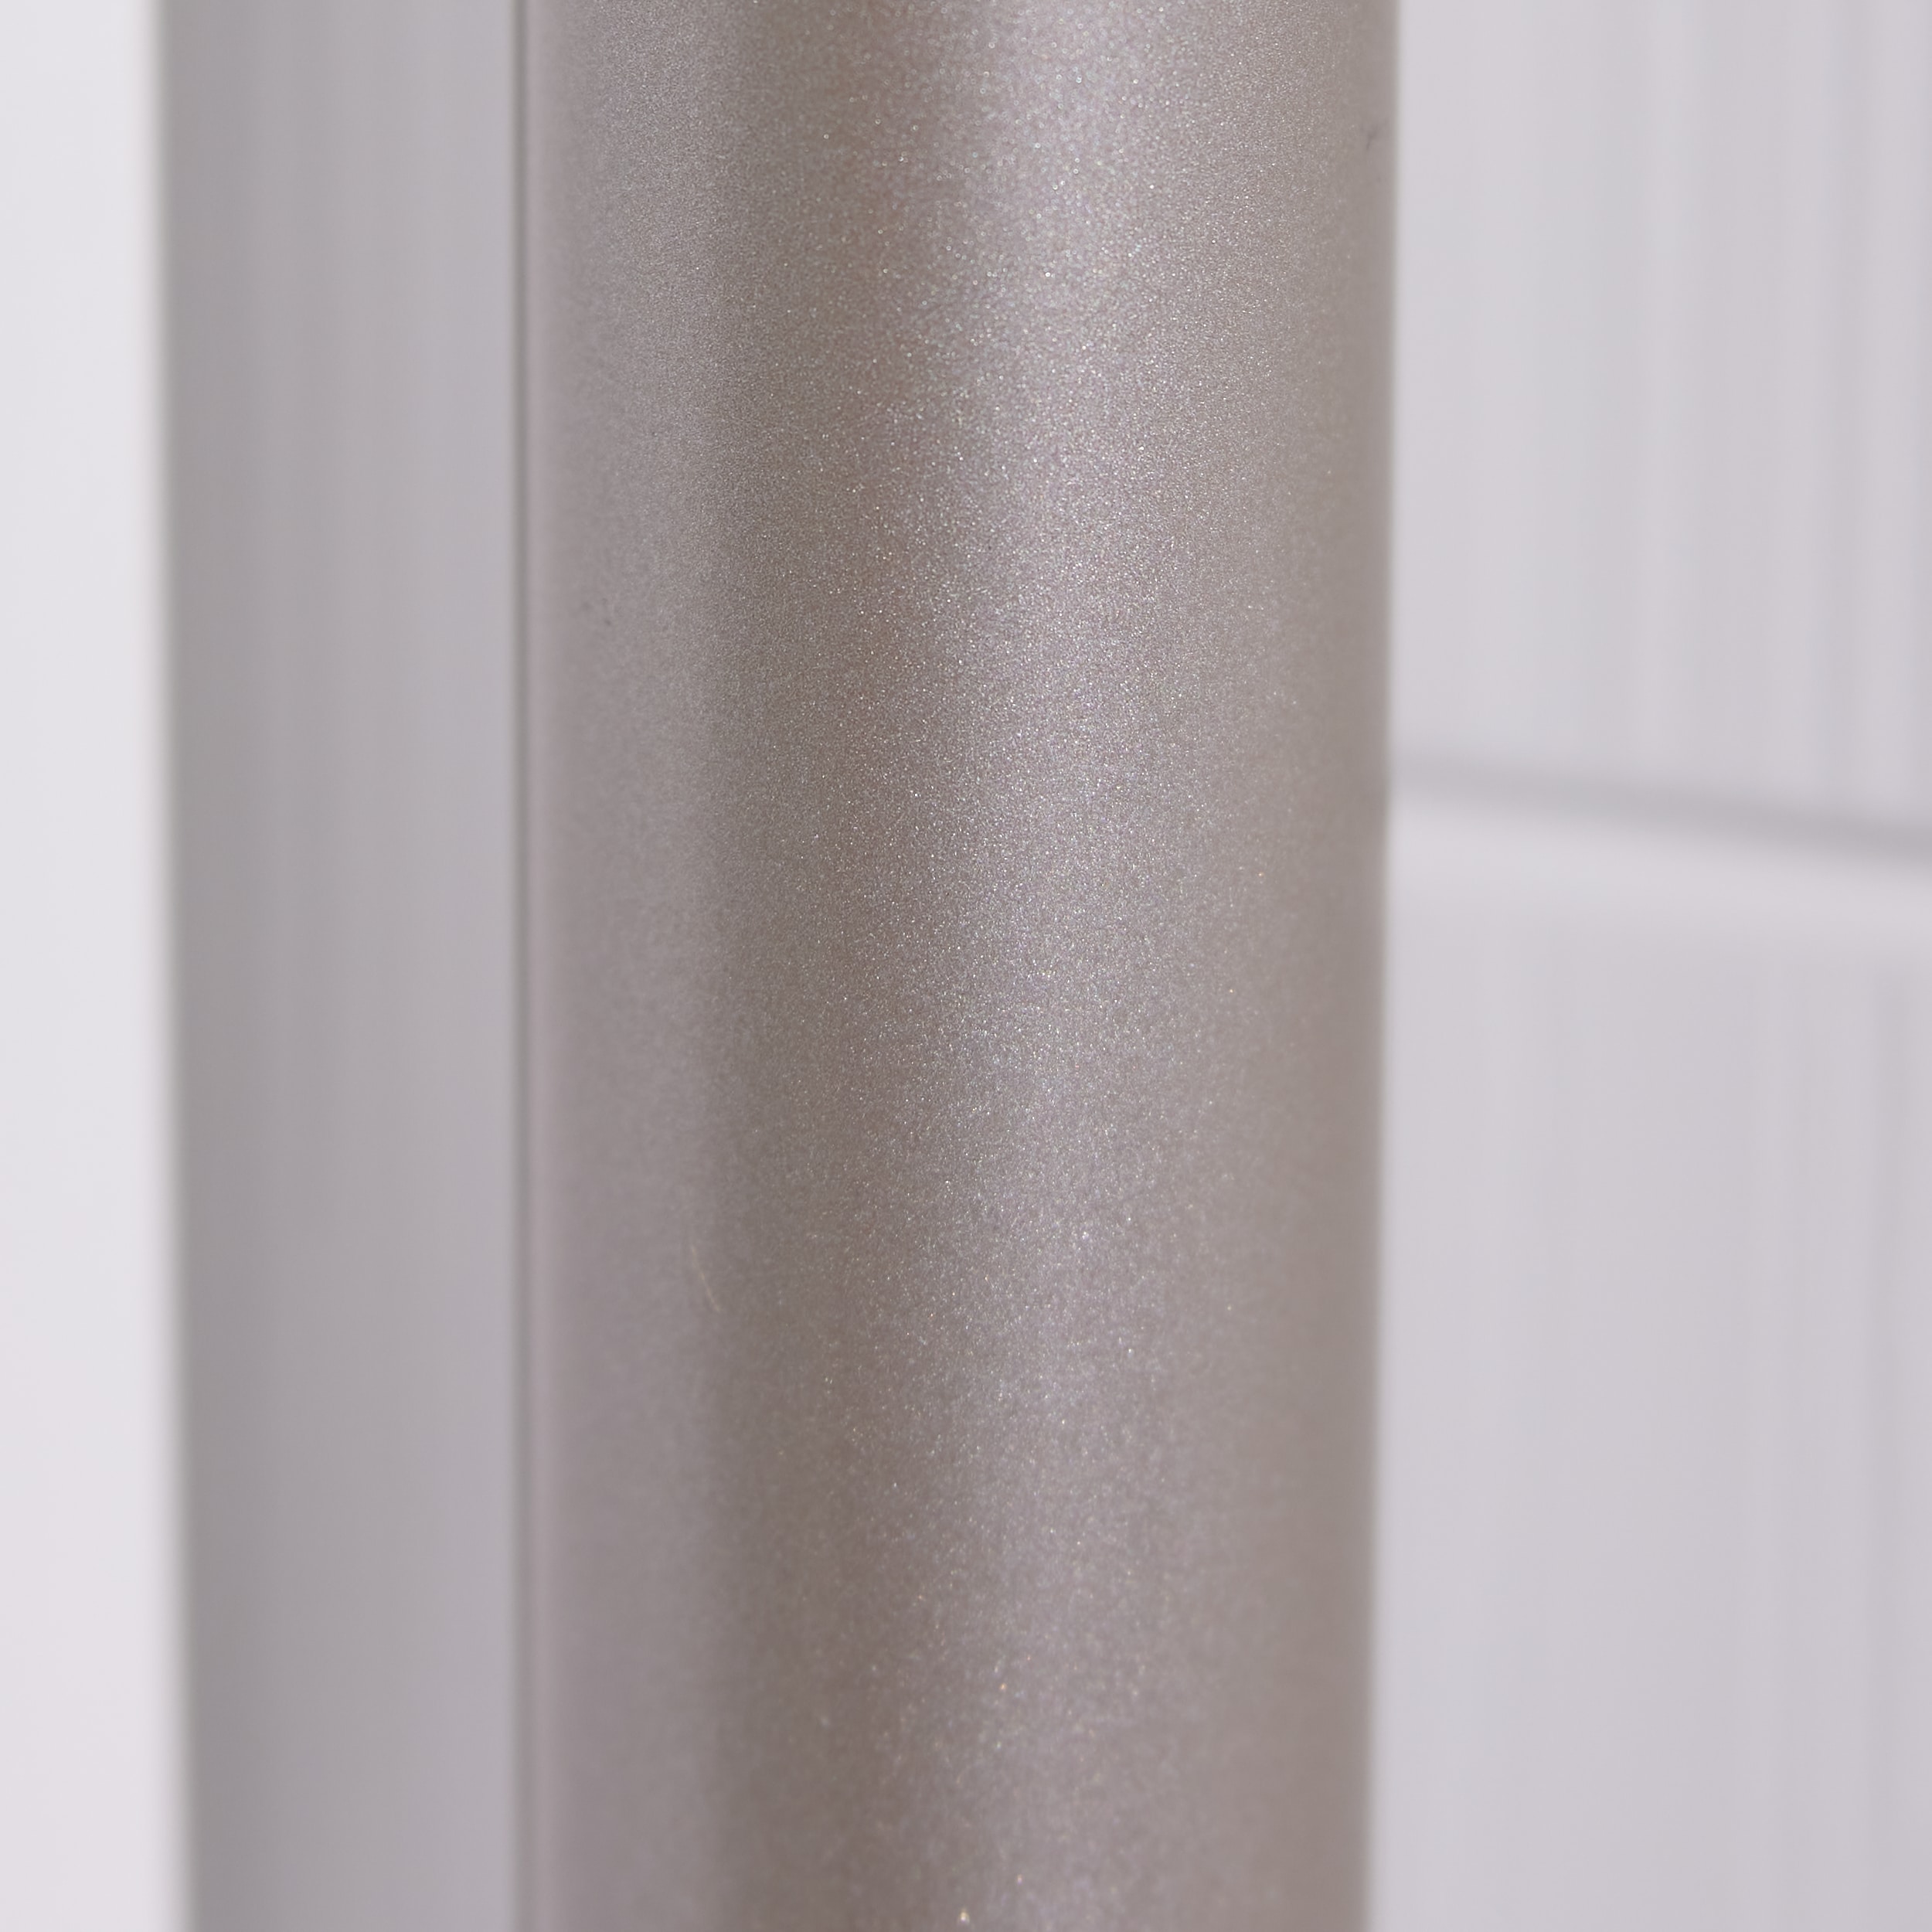 Style Selections 113-In H Steel Satin Nickel Tension Pole Freestanding Shower Caddy 41451L